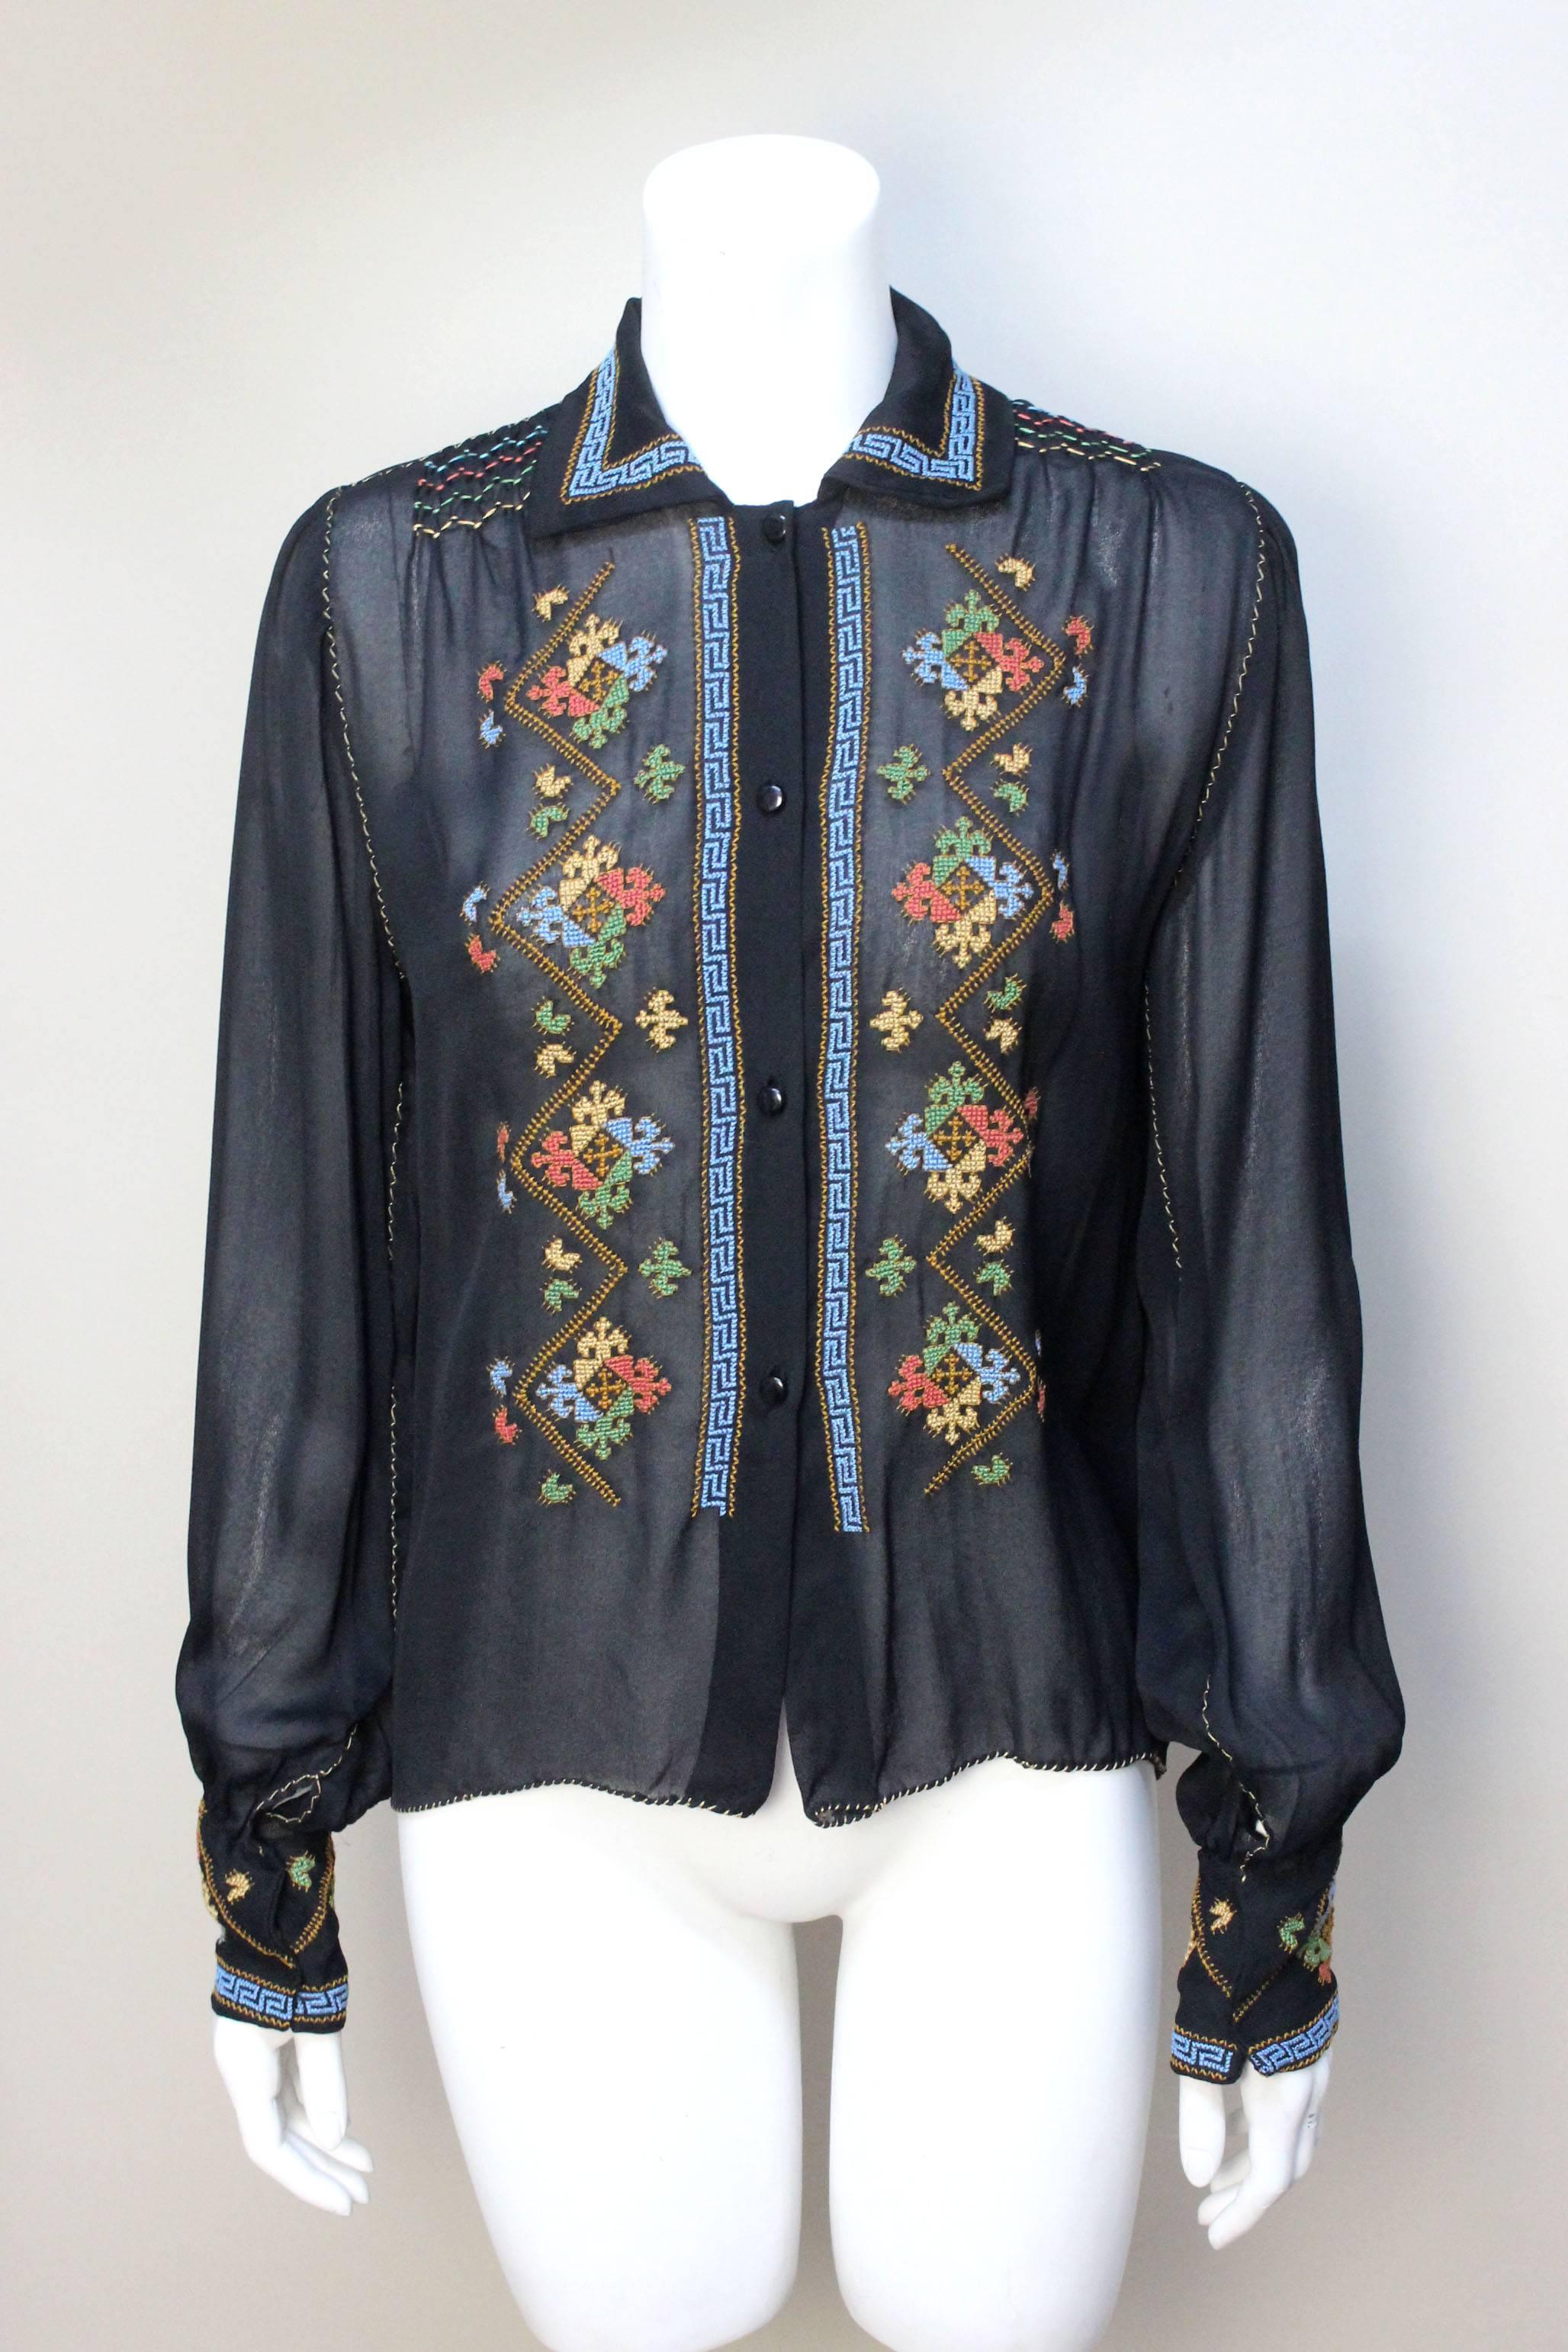 The workmanship on this delicately hand embroidered blouse is beautiful. The style and embroidered motifs suggest a date from the late 1920's to early 1930's, most likely from Greece. The details are exquisite from the multi-colored smocking at the